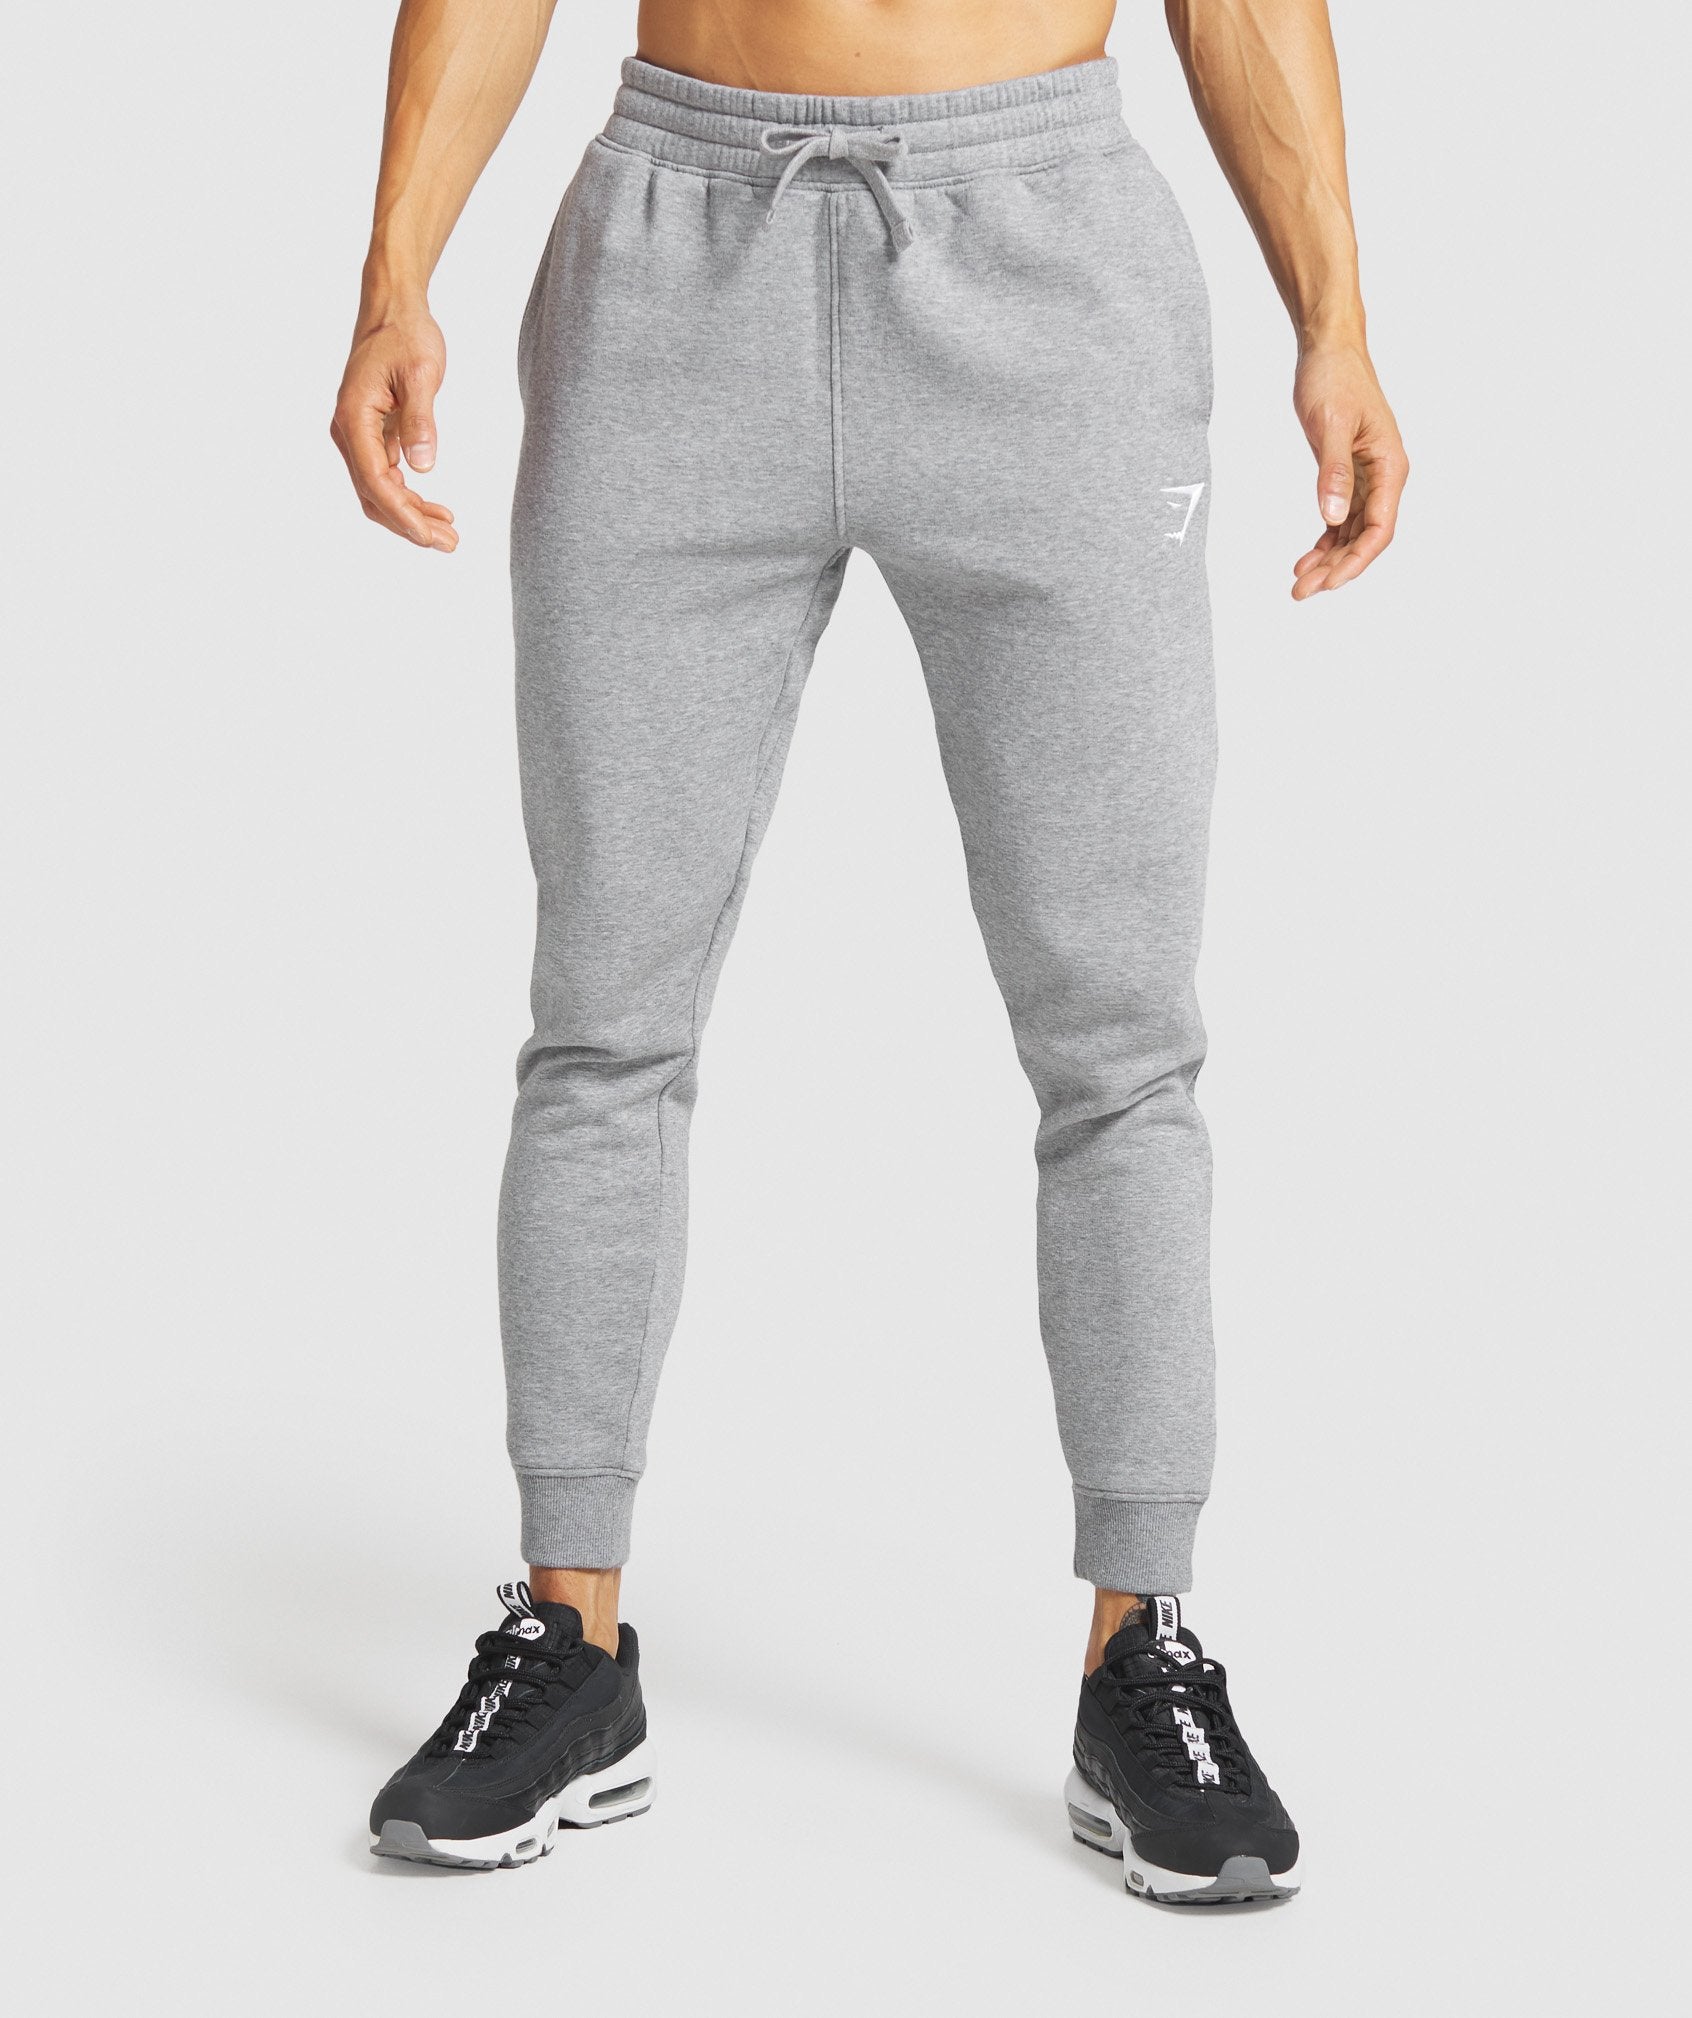 Gymshark Crest Joggers - Light Grey Marl – Client 446 100K products